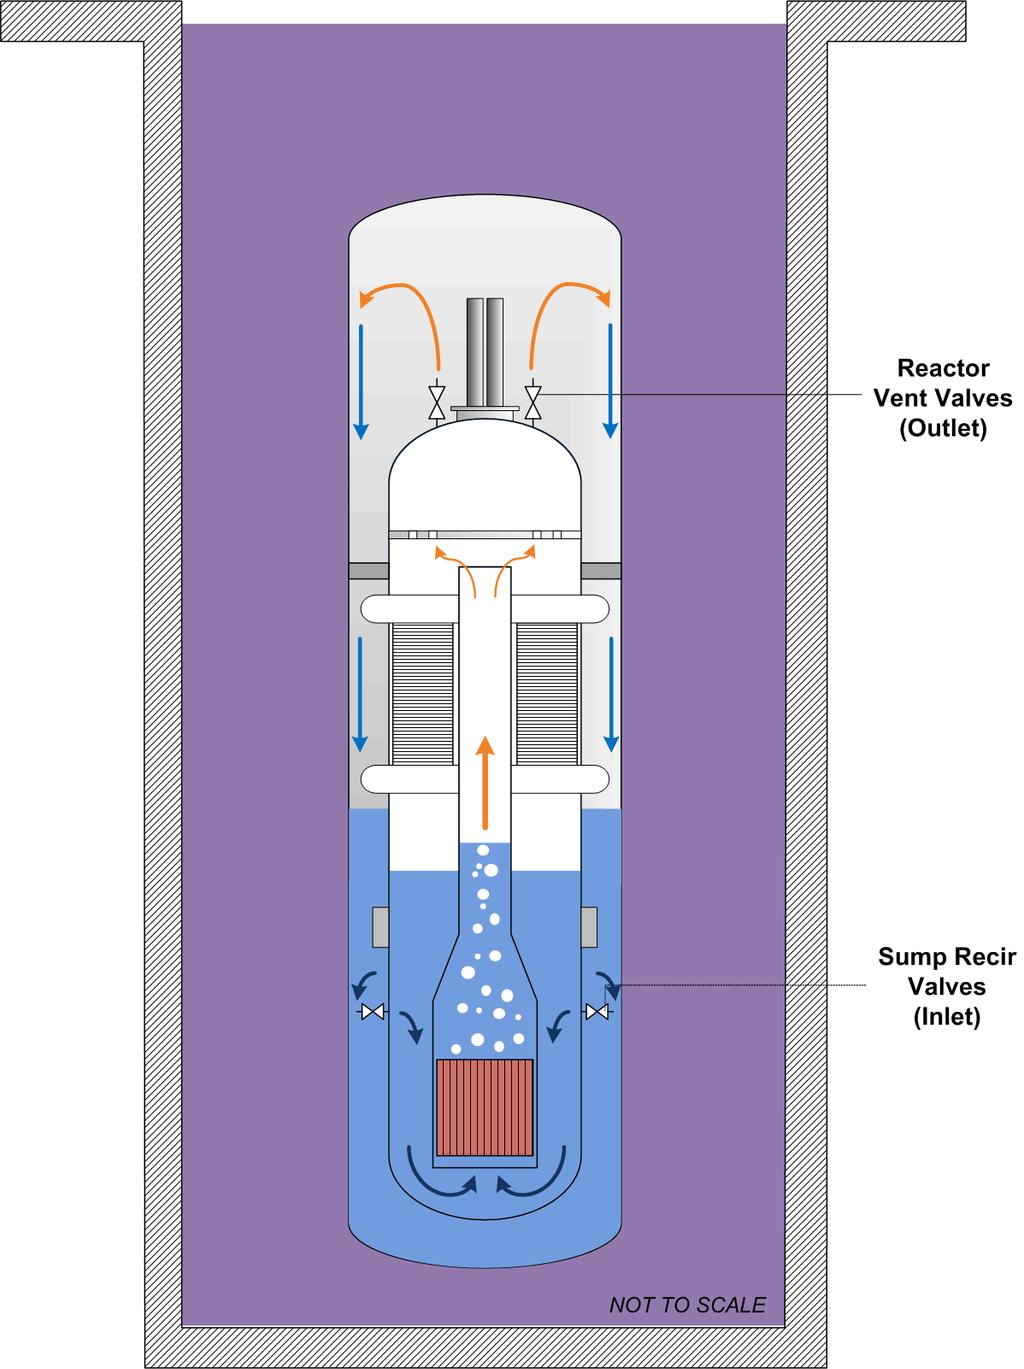 Decay Heat Removal Using the Containment Reactor Vessel steam is vented through the reactor vent valves (flow limiter) Steam condenses on containment Condensate collects in lower containment